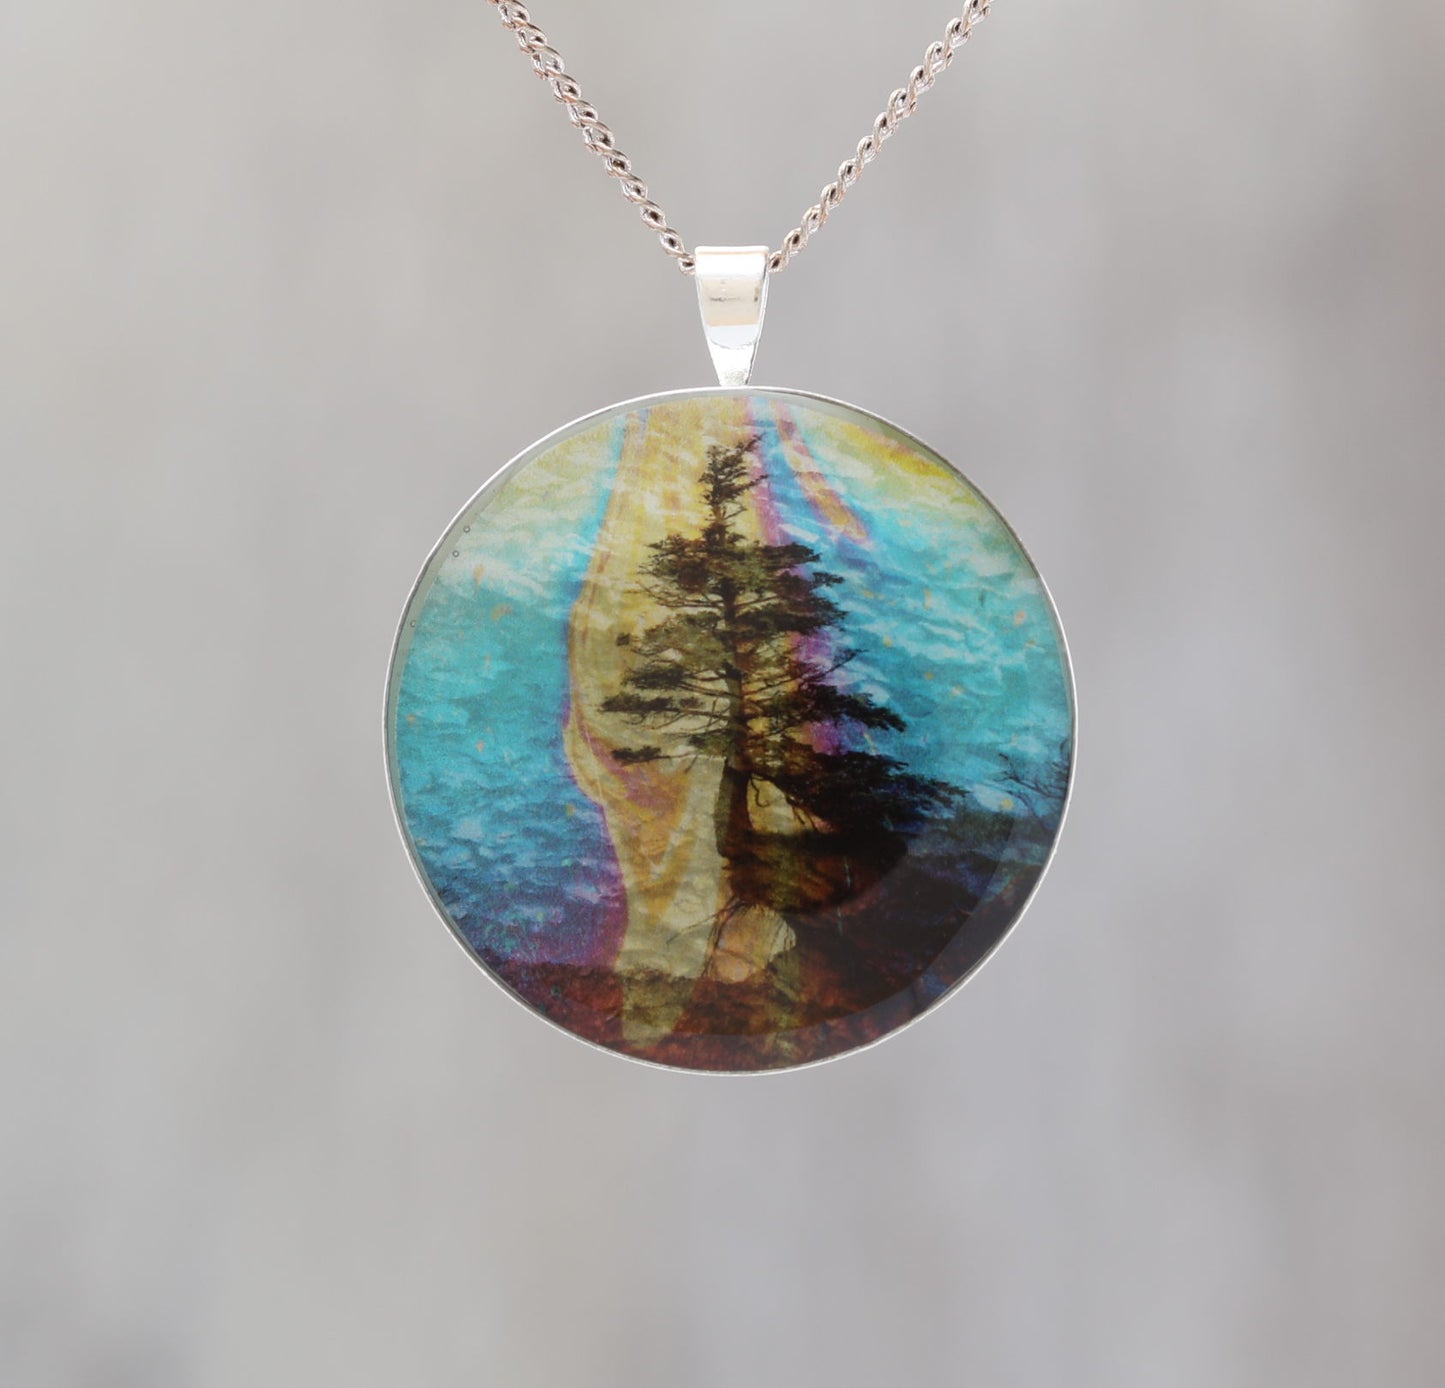 Hanging On - Glow-in-the-dark pendant with a surreal image of trees